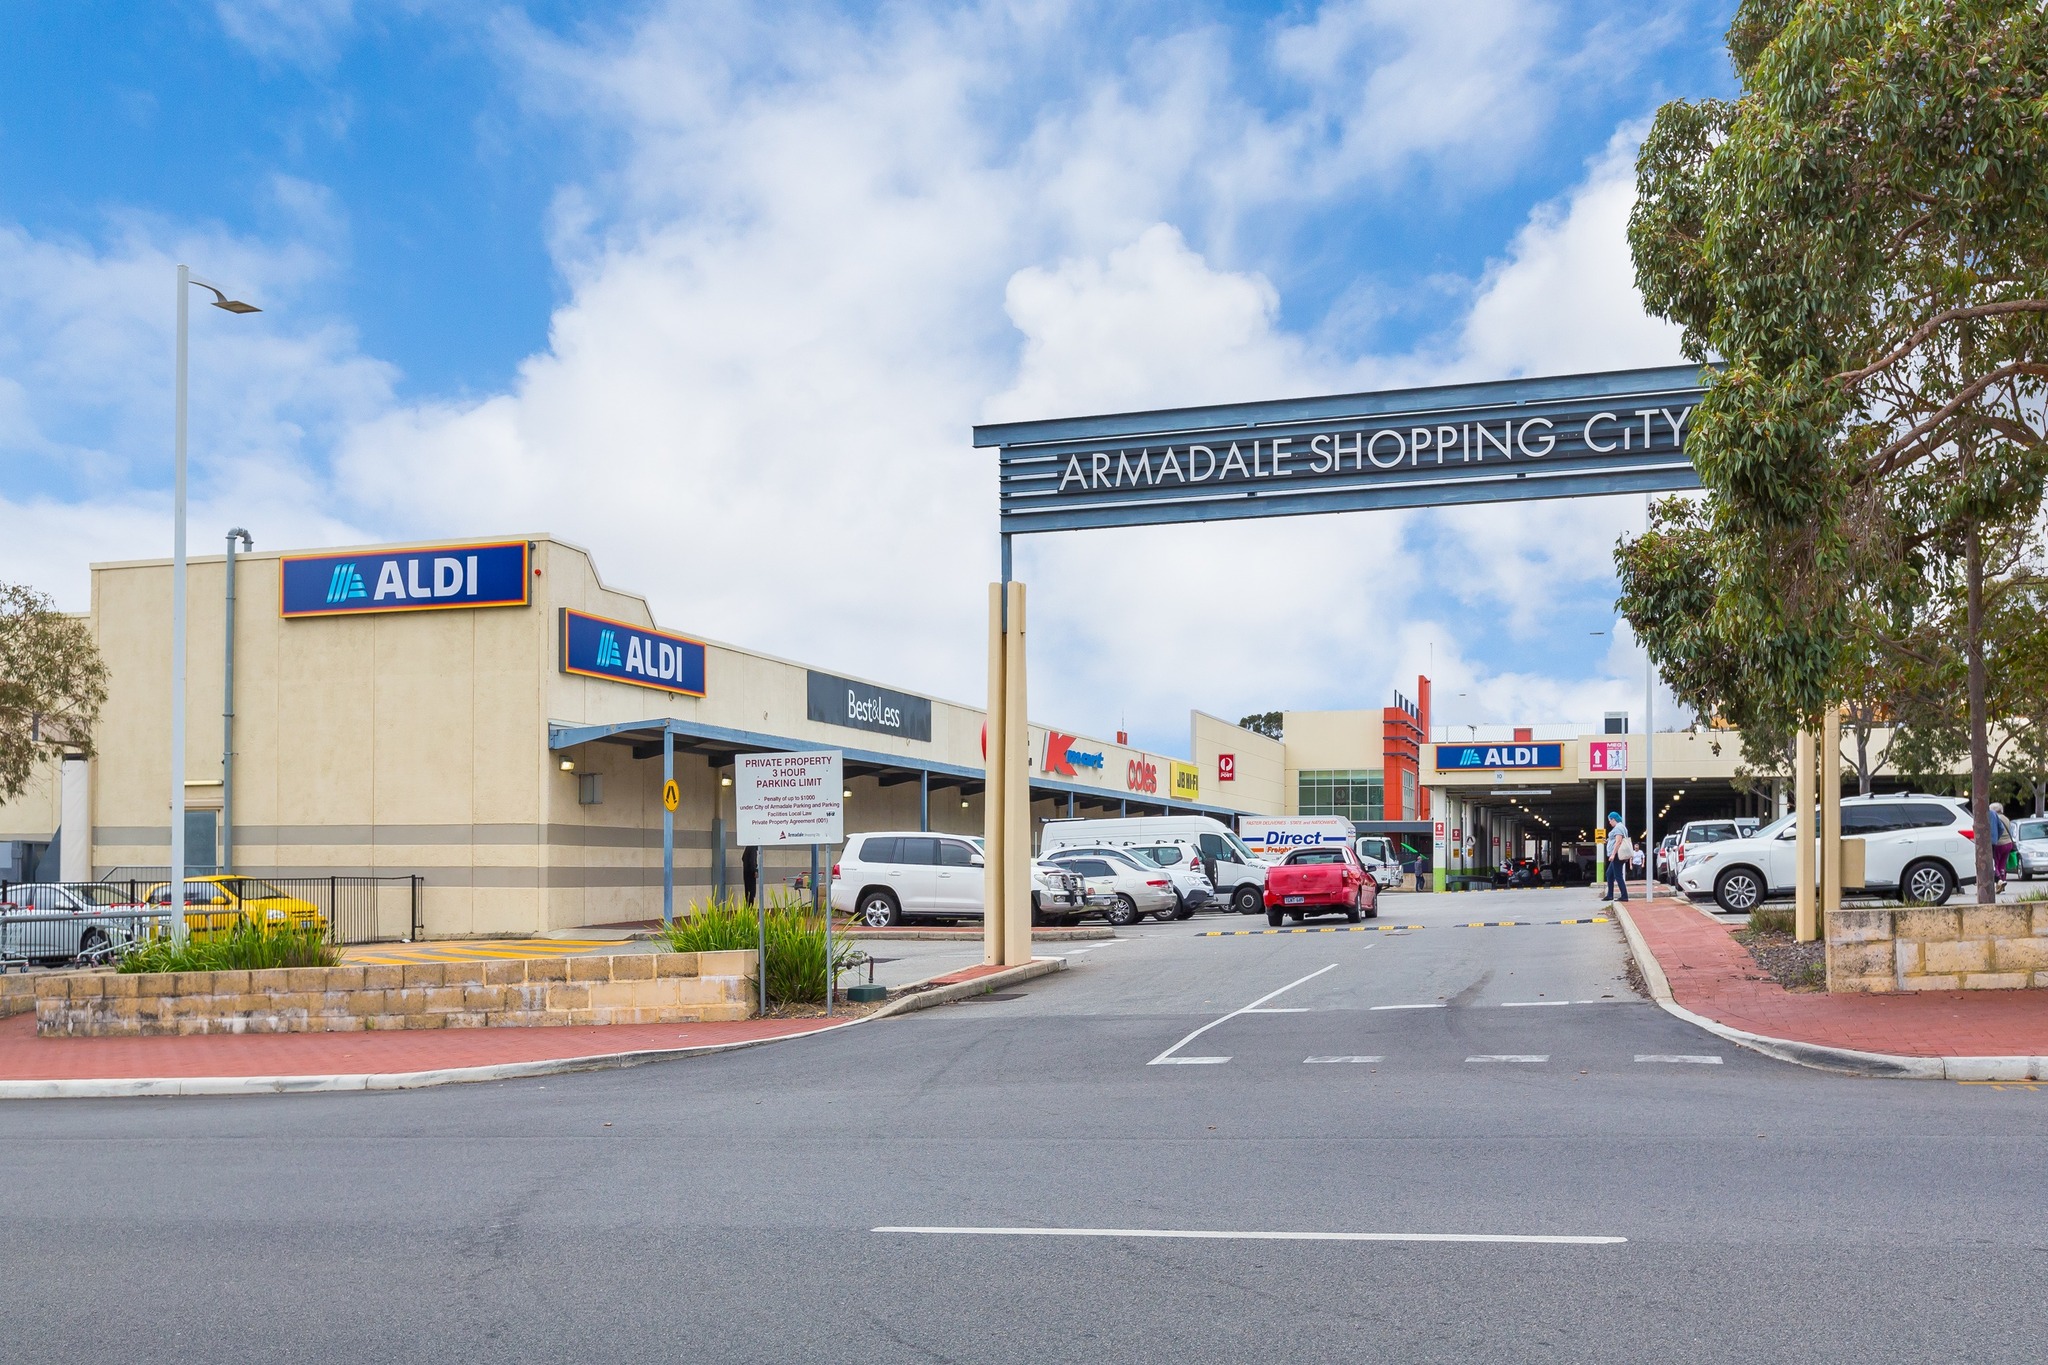 Armadale Shopping City